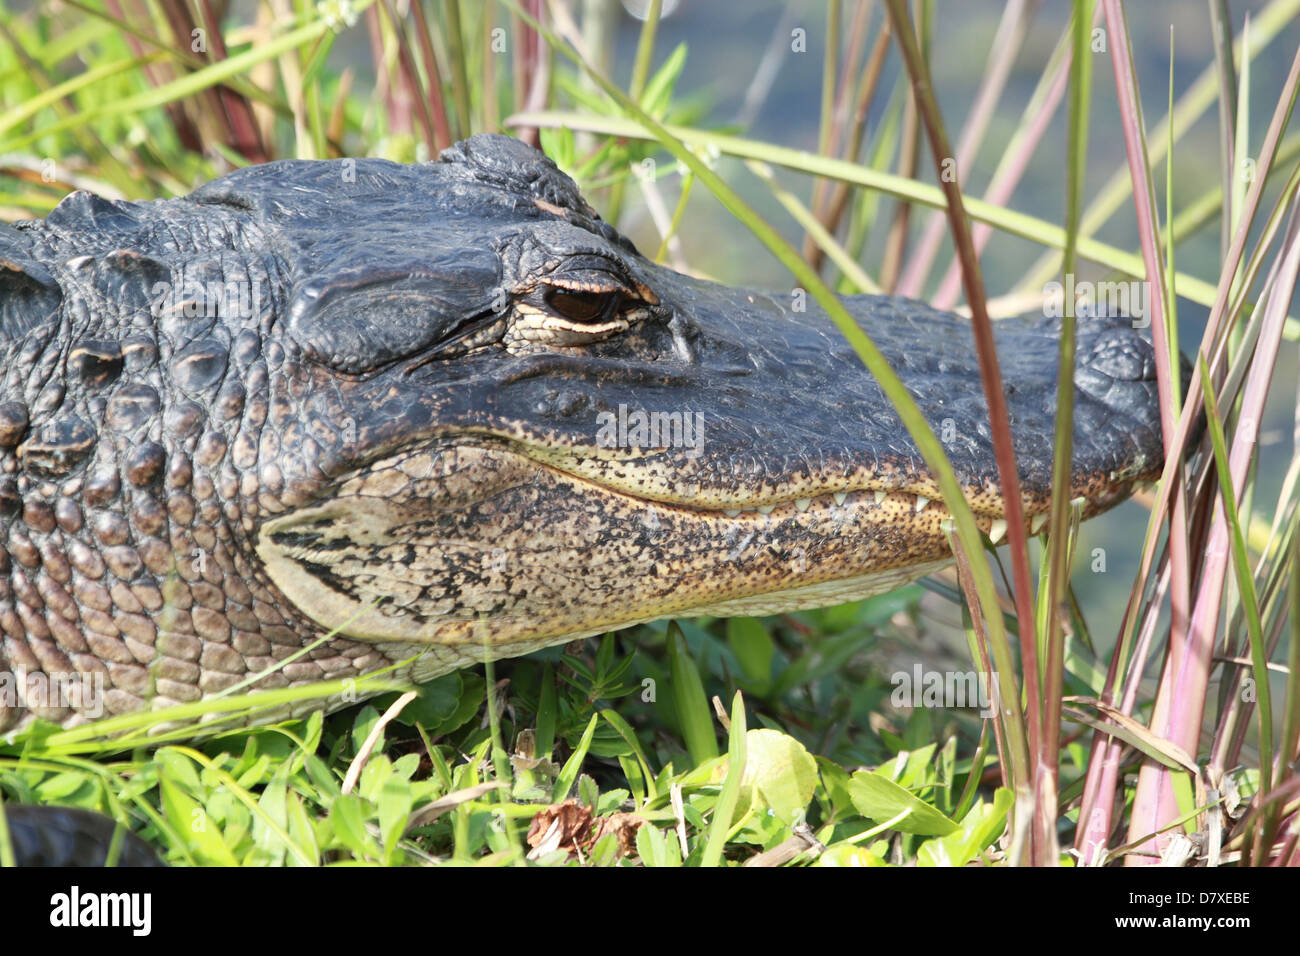 Close up of an Alligator Stock Photo